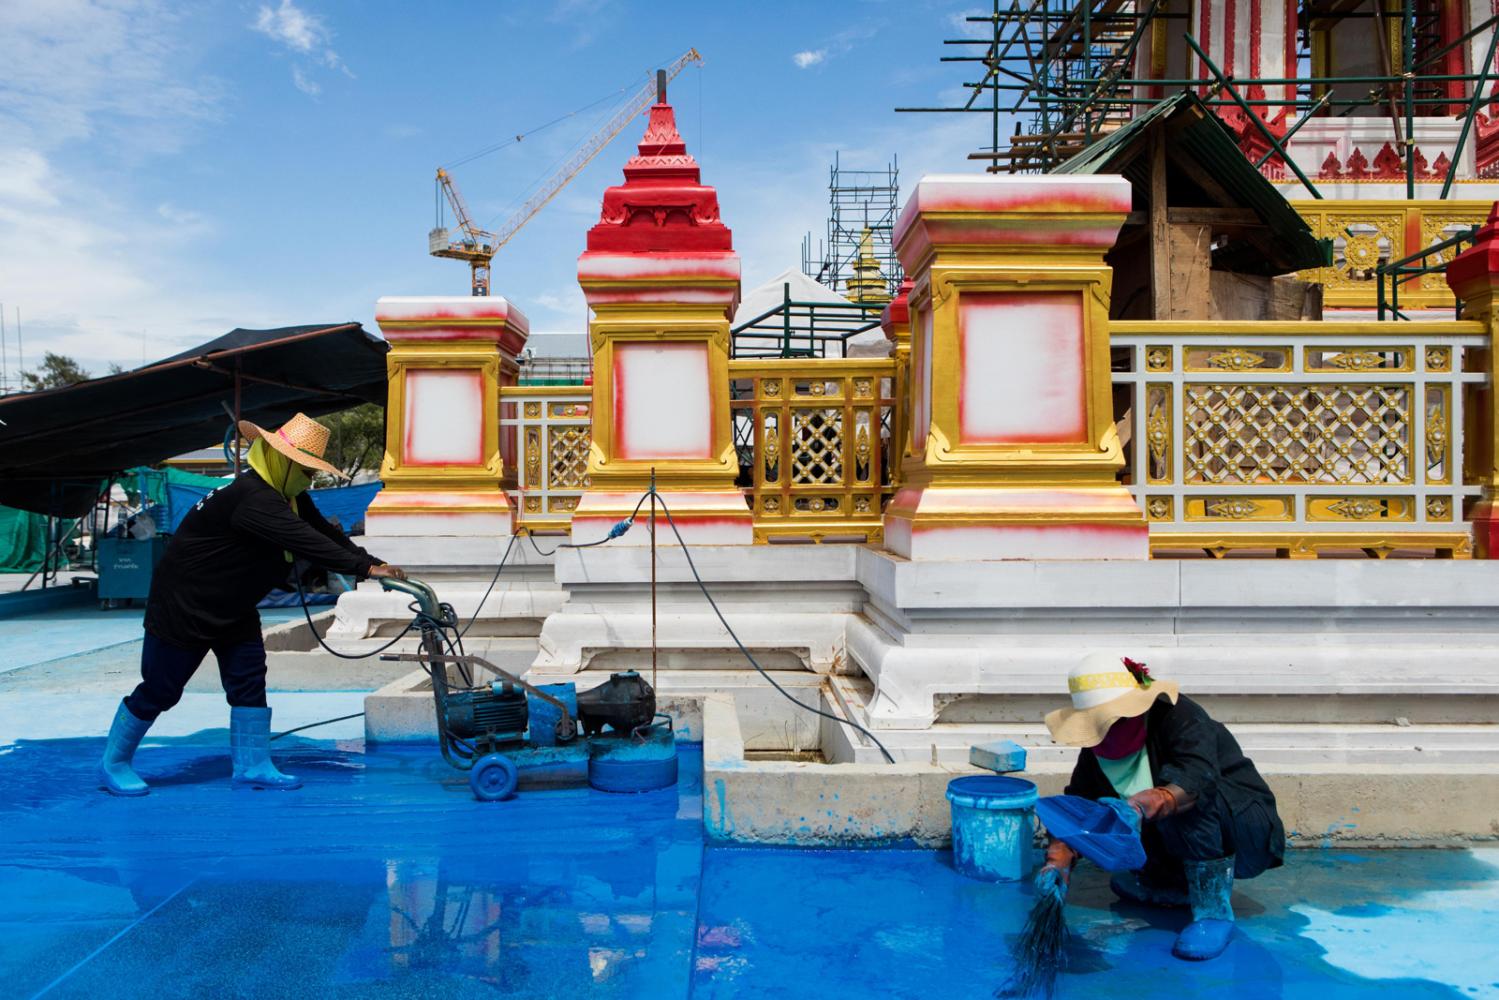 Image from Singles - Construction work underway in Bangkok for the crematorium...